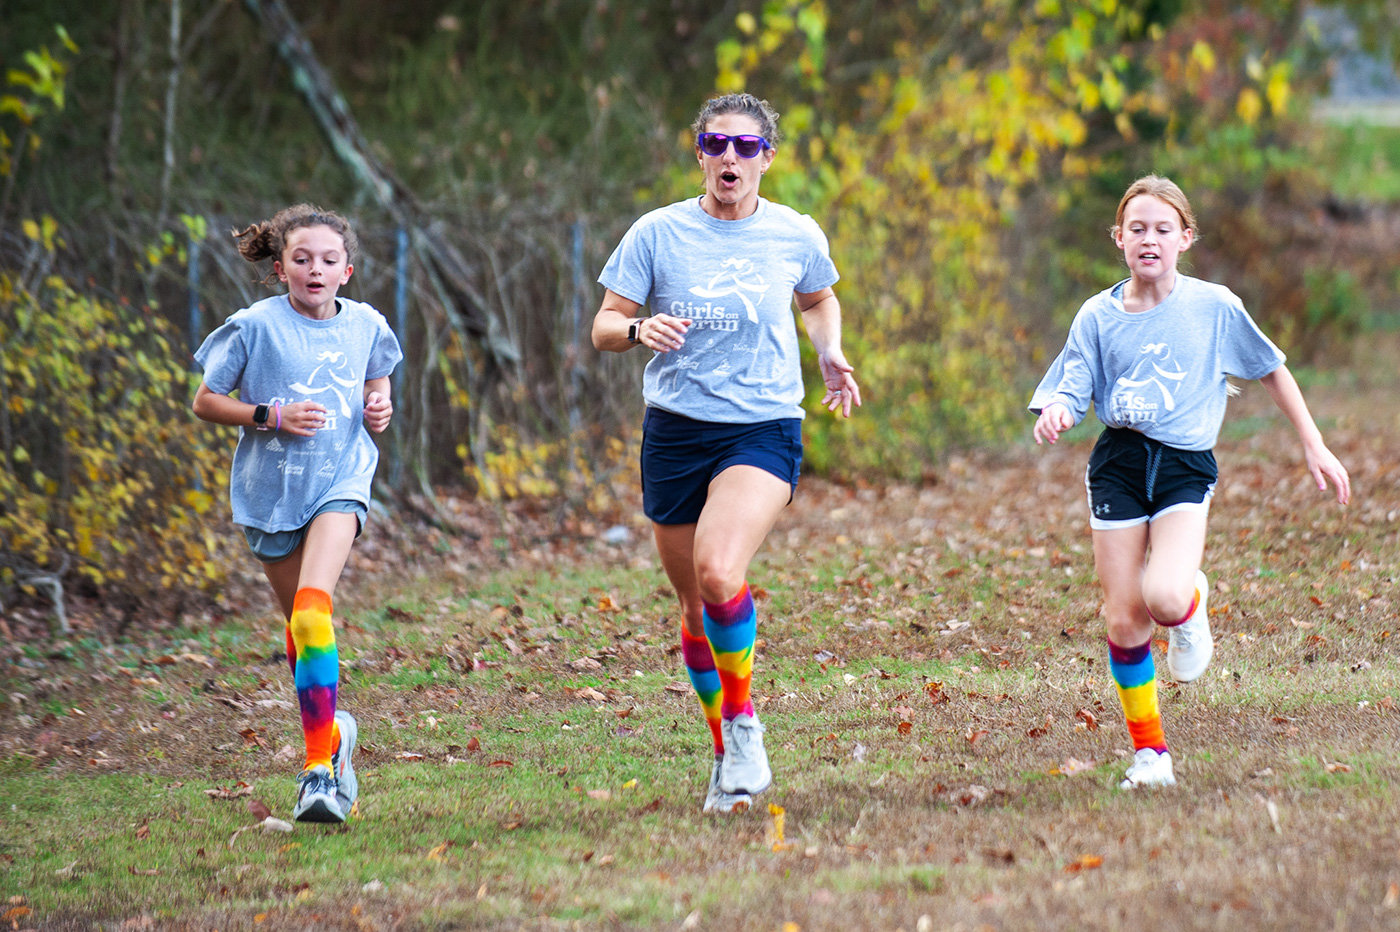 Oak Hill Elementary Girls on the Run head coach Allison Hamilton (center) slowed her pace to offer encouragement to Morgan Hamilton (left) and Claire Crivella.